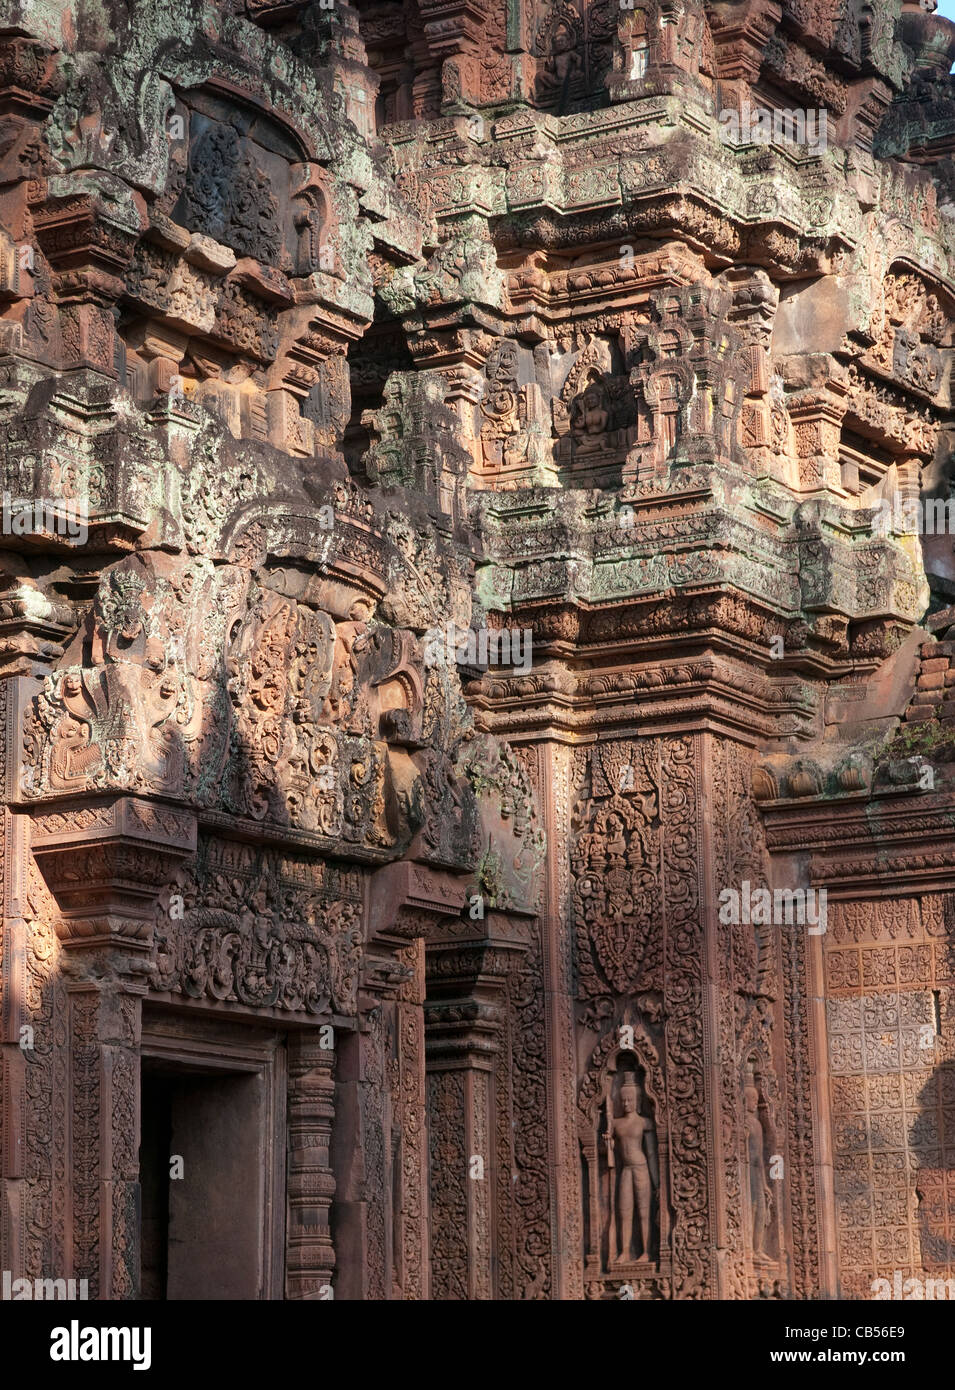 Detail of the Banteay Srey Temple in Siem Reap, Cambodia Stock Photo